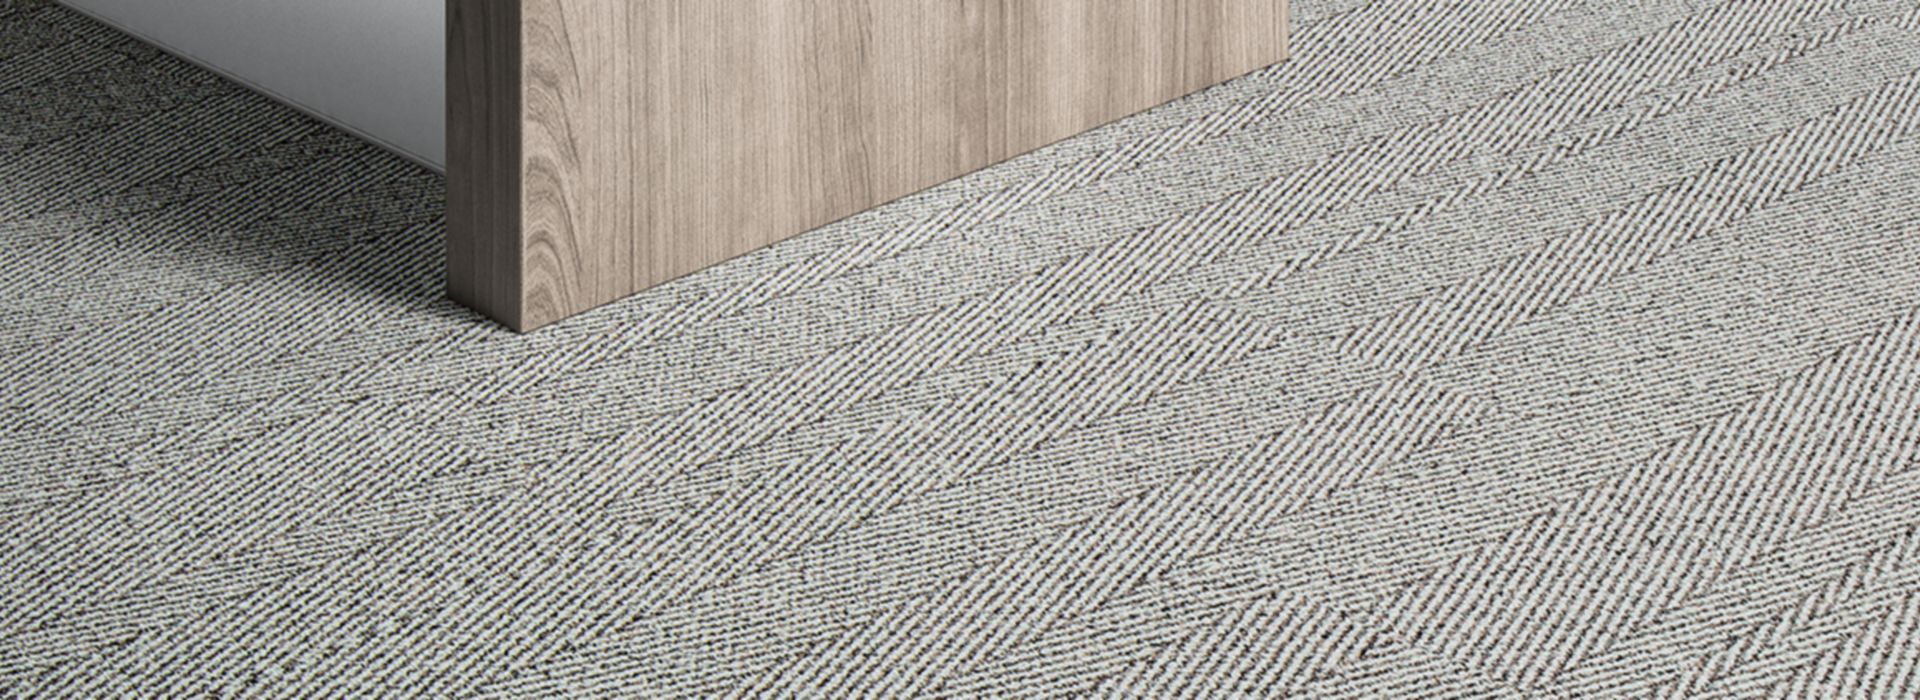 Interface Stitch in Timeplank carpet tile  in office with wood desk and chair imagen número 1